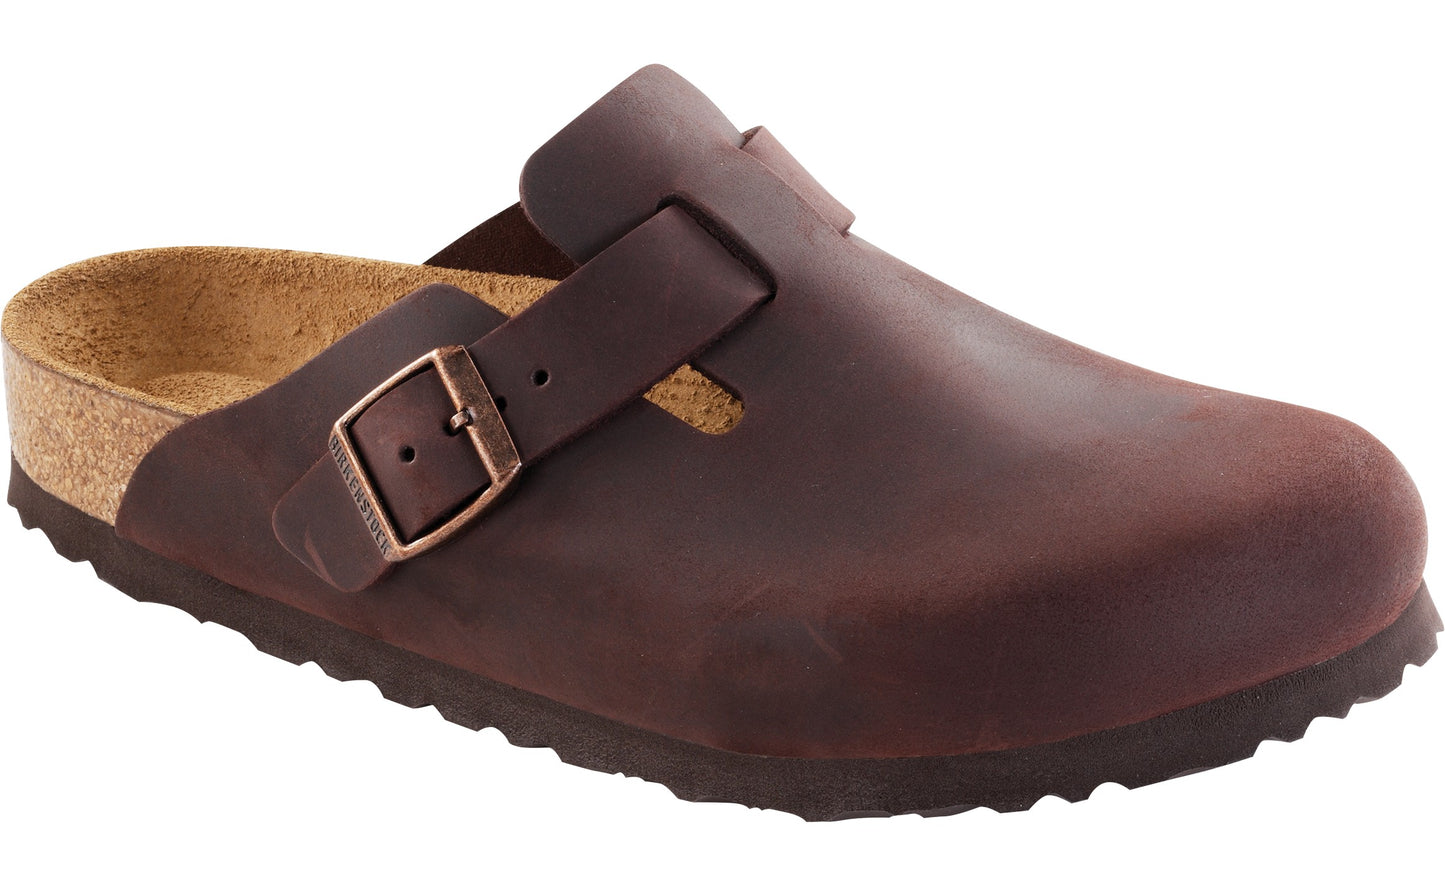 Birkenstock Boston Soft Footbed Habana leather 159713 and 159711 (43-46)